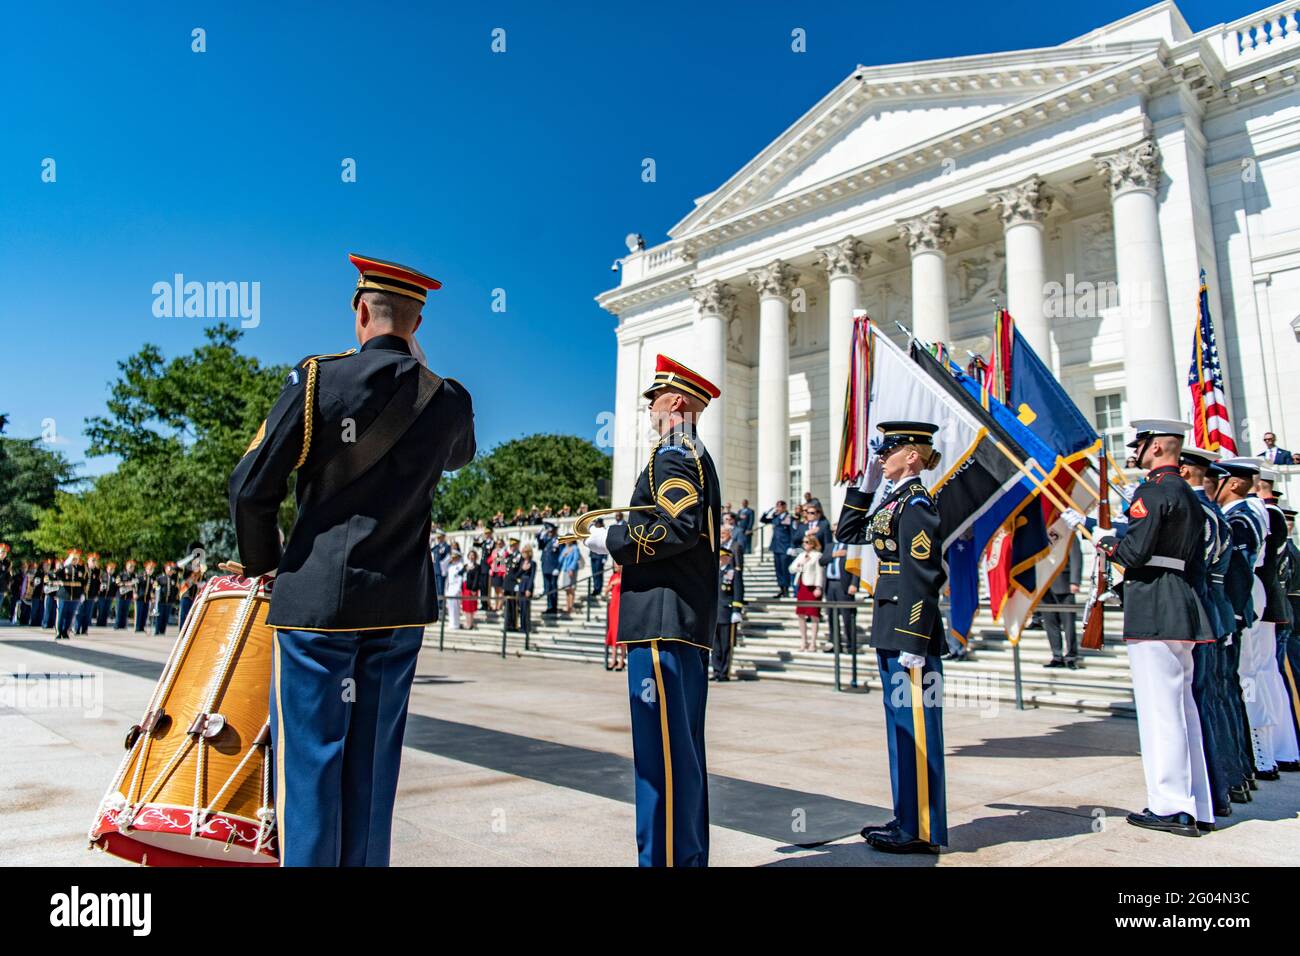 Arlington, United States Of America. 31st May, 2021. U.S Armed Forces honor guards salute during the Presidential Armed Forces Full Honors Wreath-Laying Ceremony at Arlington National Cemetery May 31, 2021 Arlington, Virginia. Credit: Planetpix/Alamy Live News Stock Photo